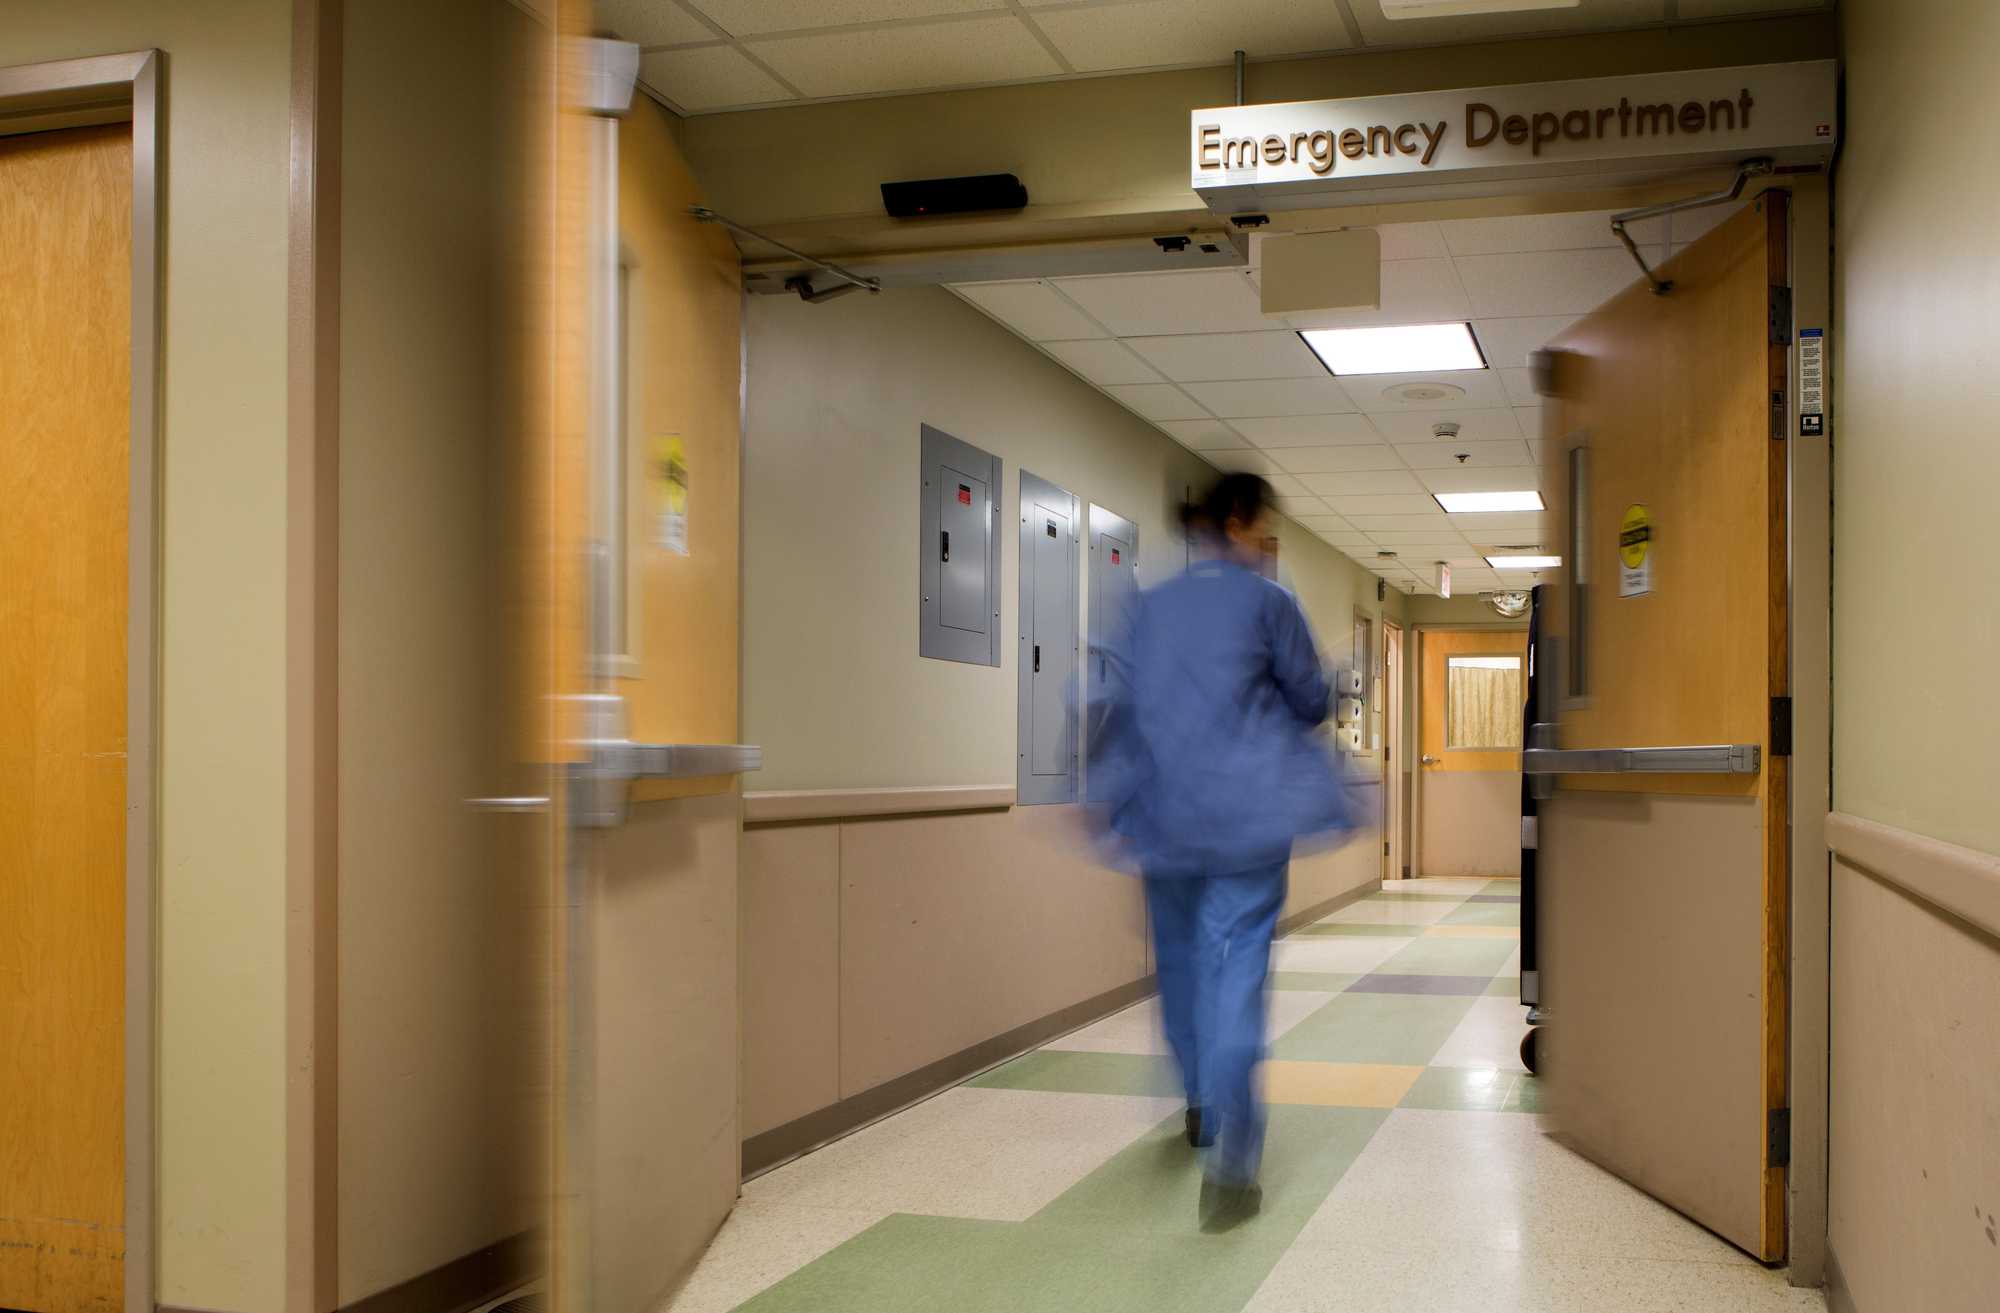 The emergency department at Catholic Medical Center. The case of Frank Pellegrino, who came to the emergency room in 2014, resulted in a malpractice suit against Dr. Baribeau.